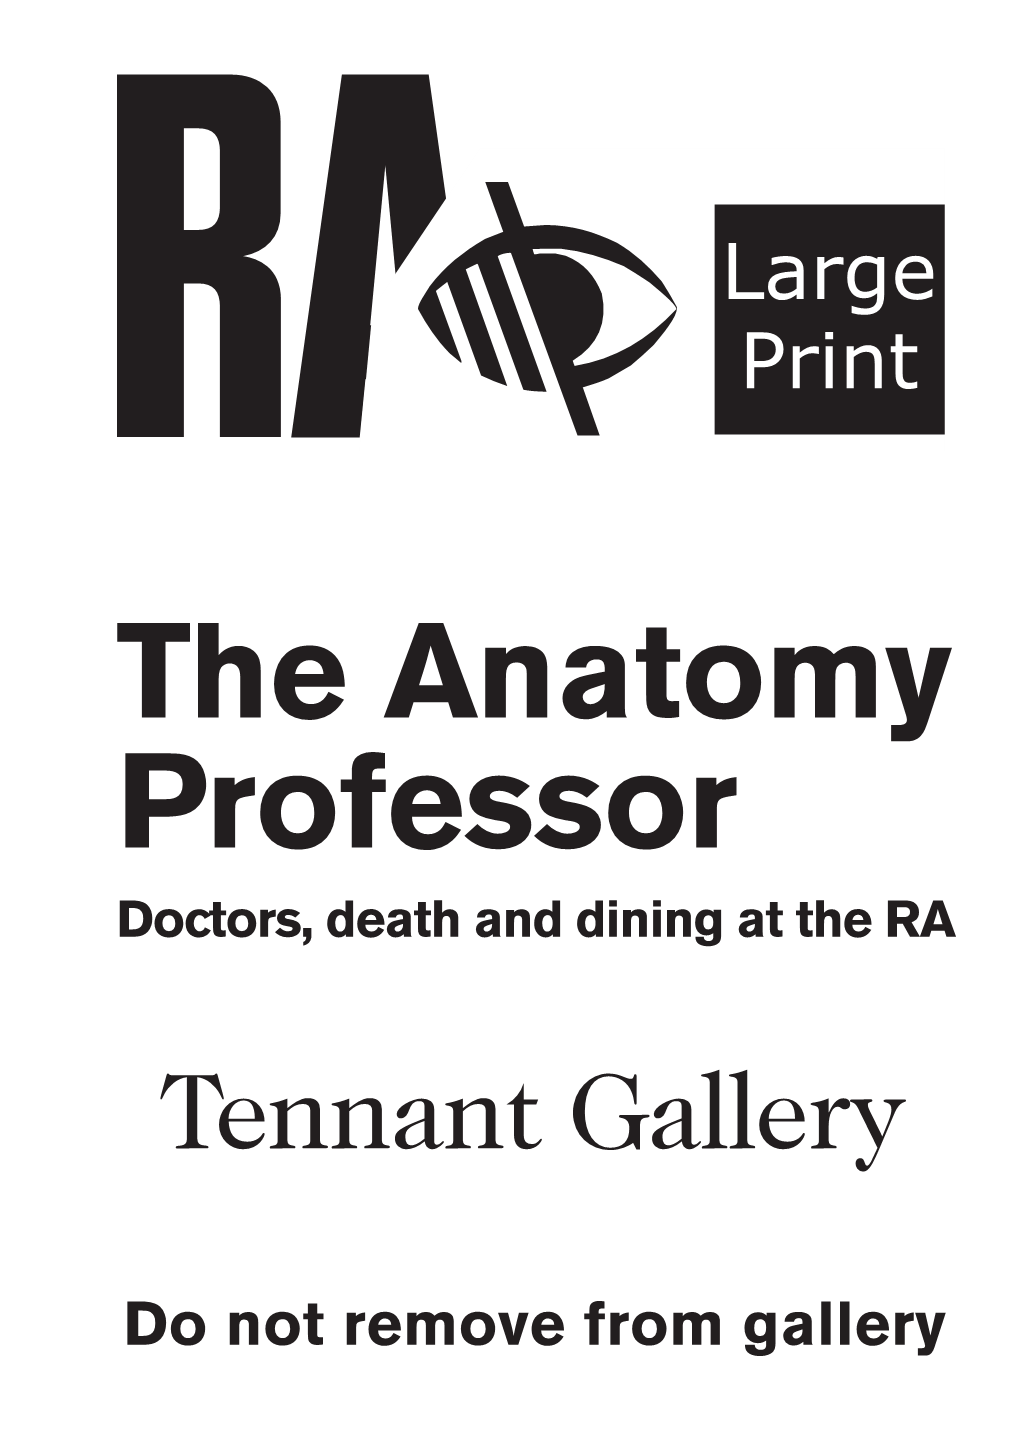 The Anatomy Professor Doctors, Death and Dining at the RA